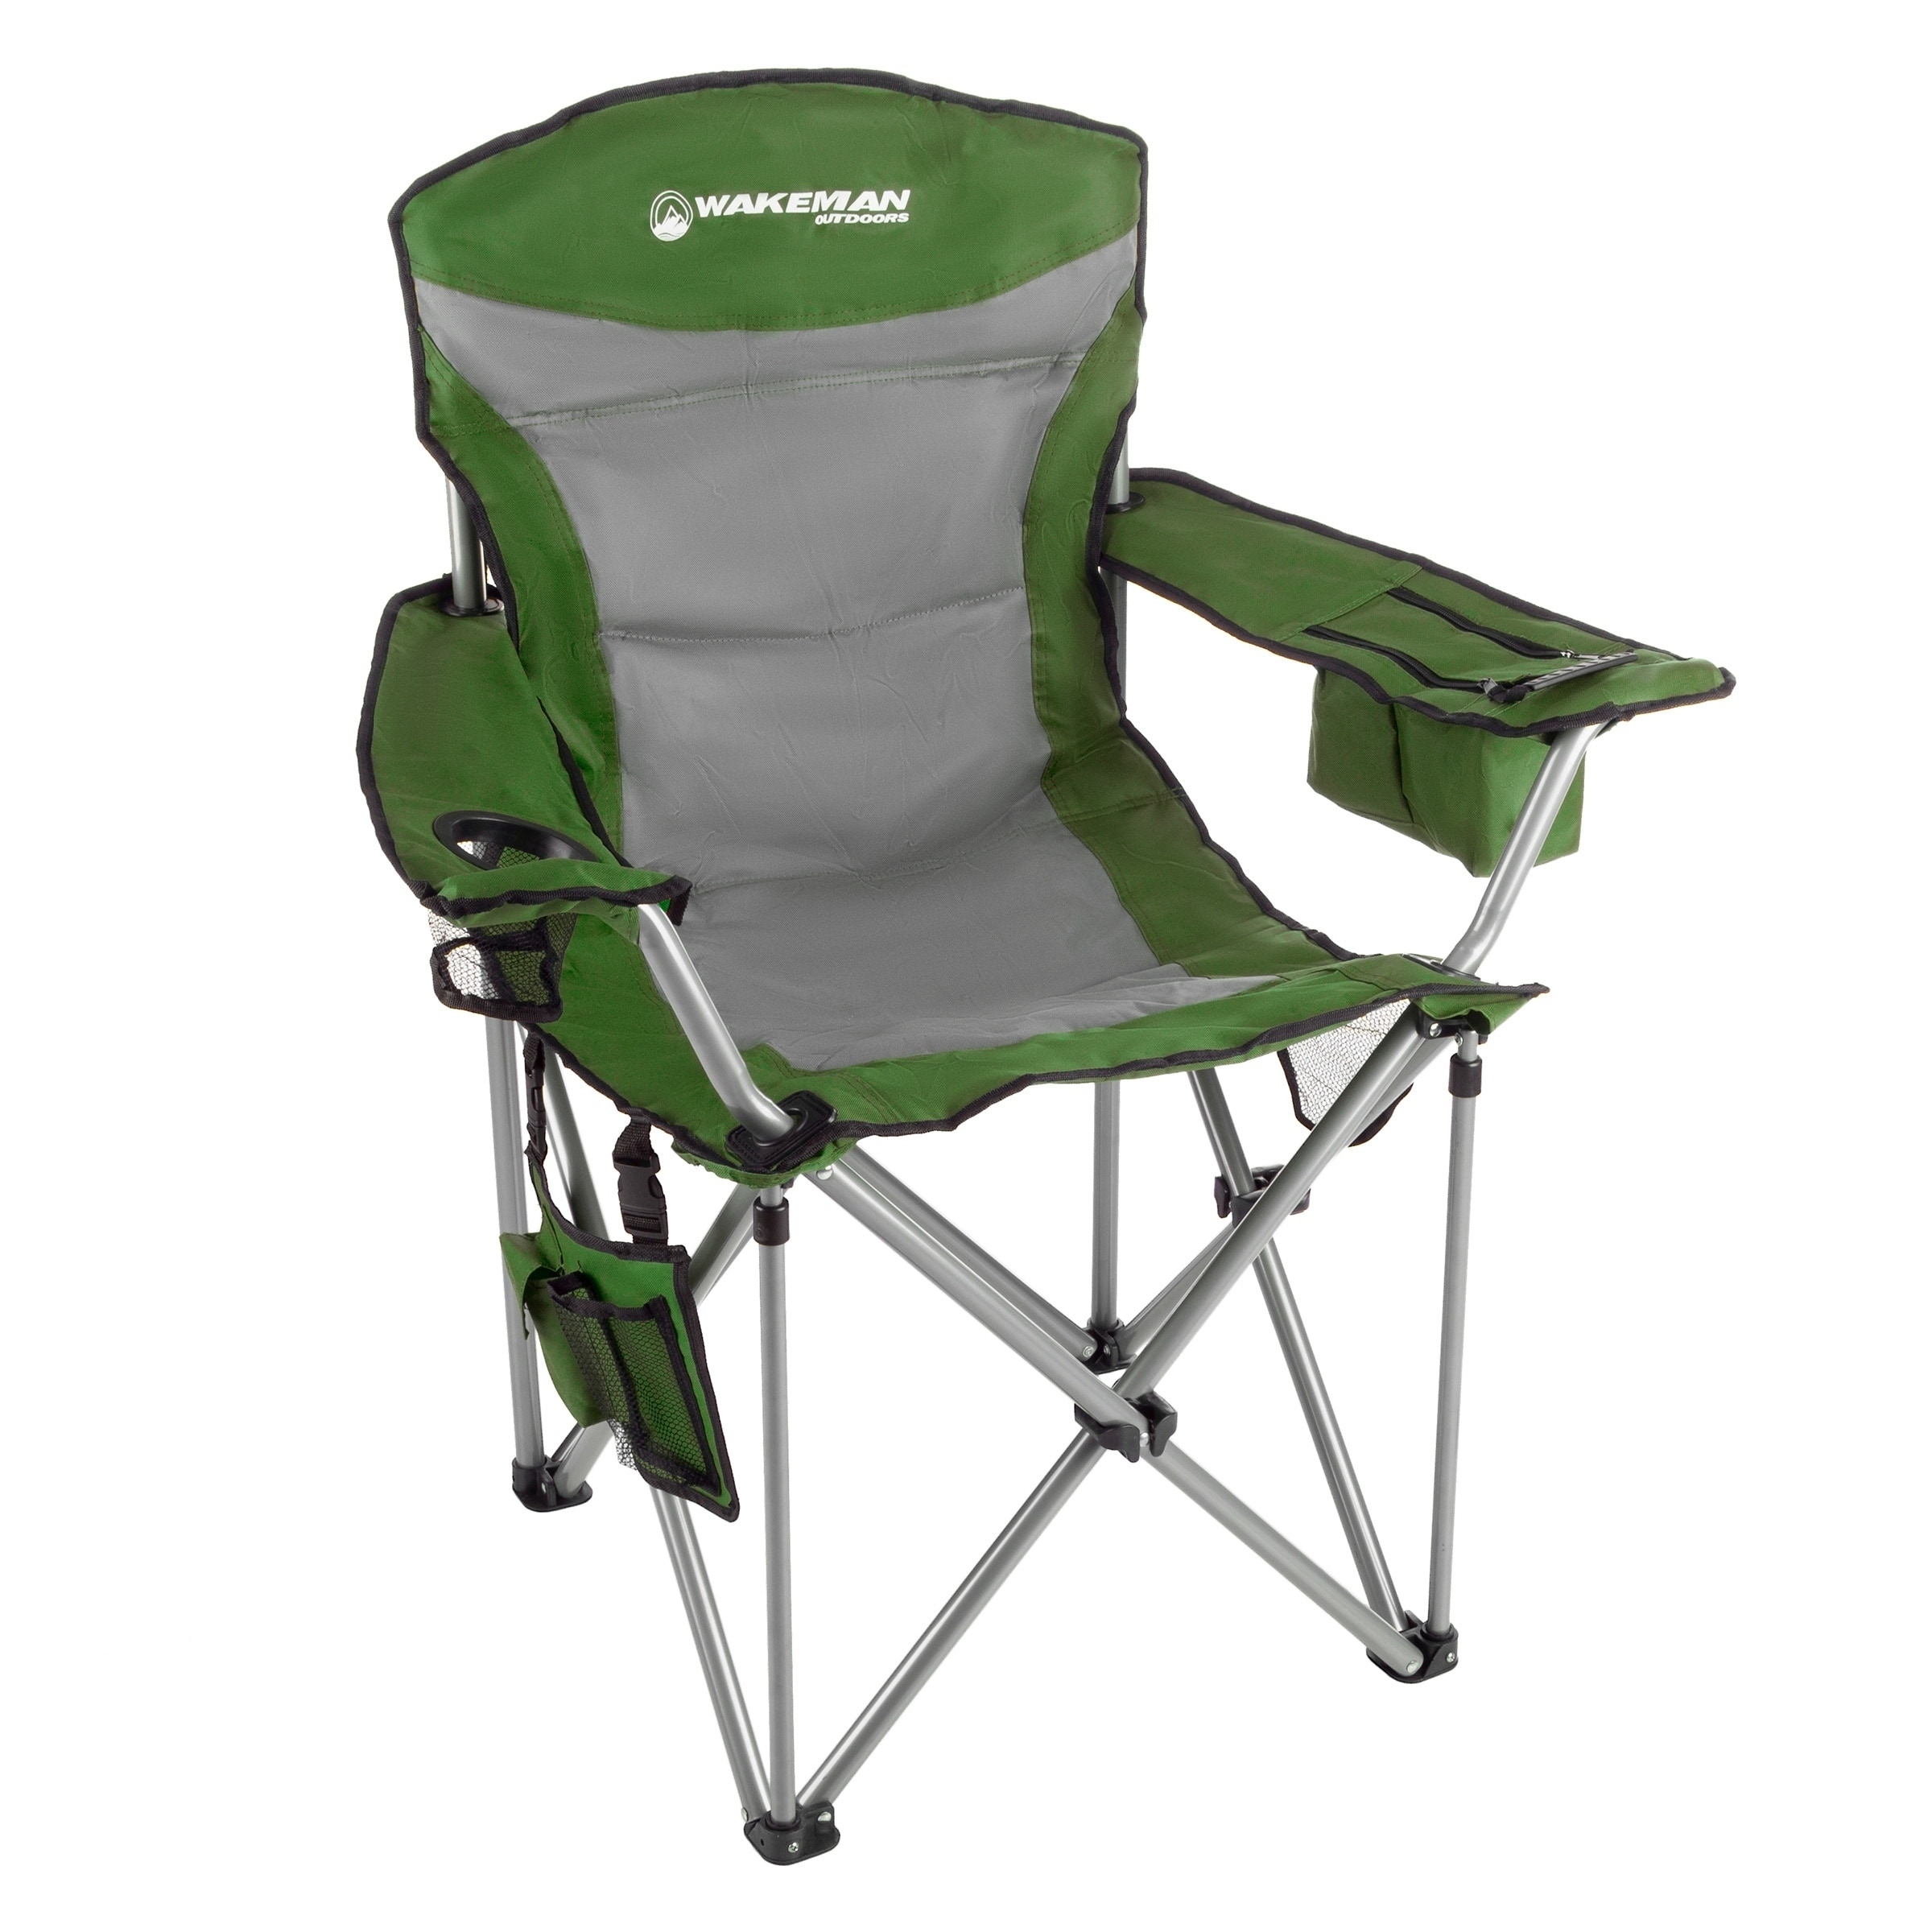 Wakeman Outdoors Heavy Duty 850 Pound High Weight Capacity Big Tall Quad Seat Camp Chair With Cupholder/cooler/carrying Bag